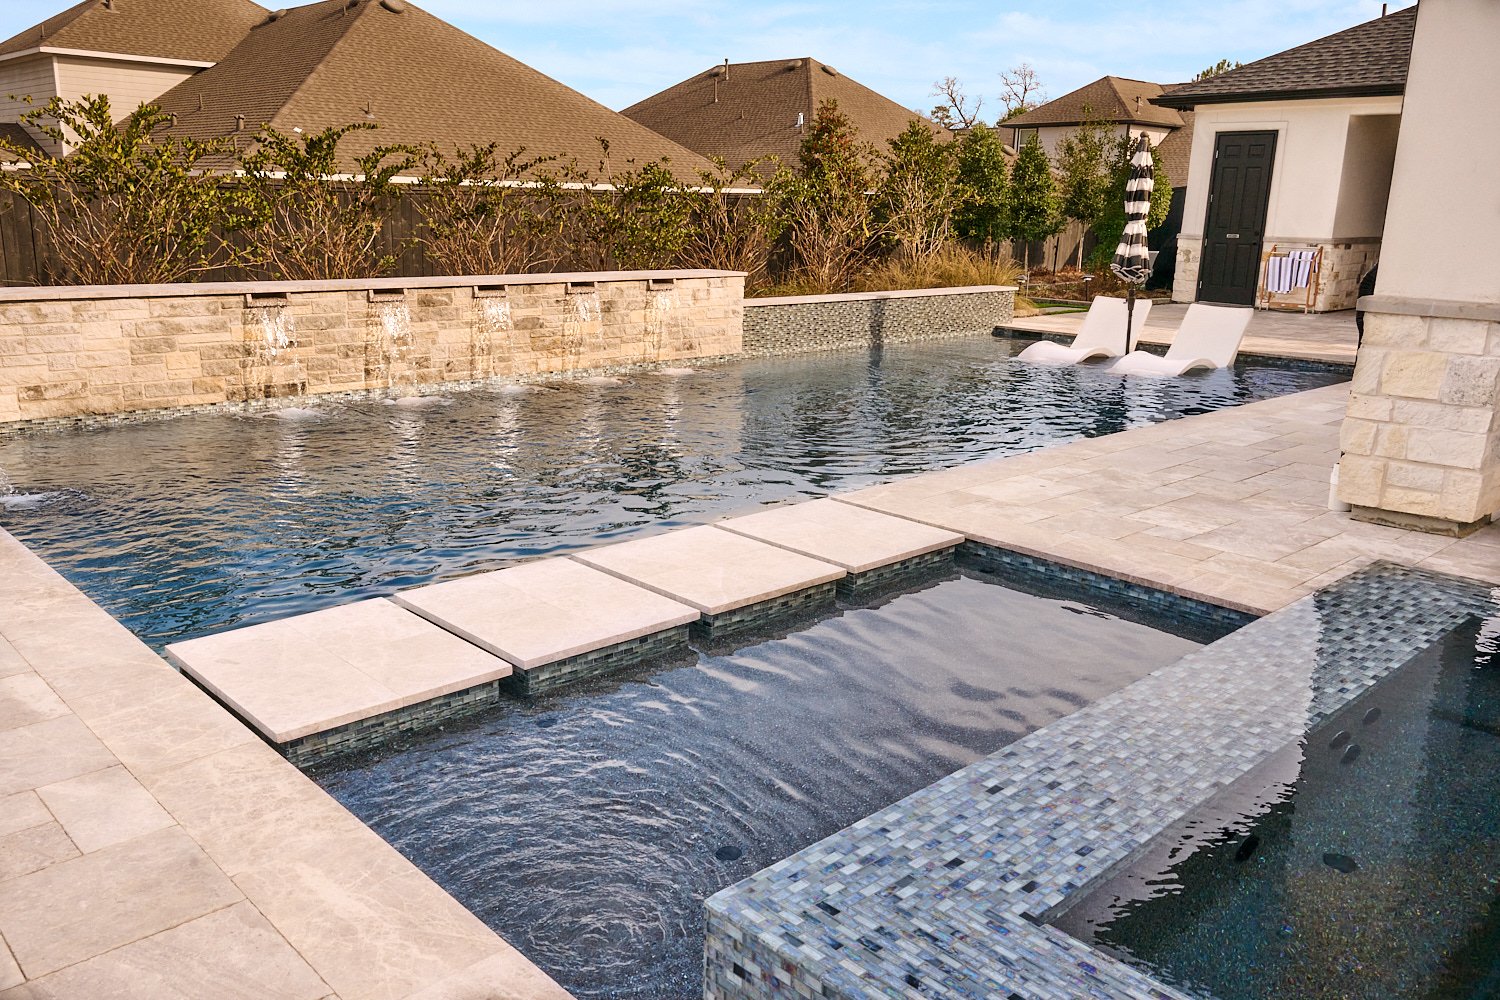  CONROE, TEXAS - JANUARY 2023: wide shots and close ups of a fully equipped outdoor kitchen, a covered patio, a swimming pool with scuppers, a spa with perimeter overflow and a fire pit with chairs. 